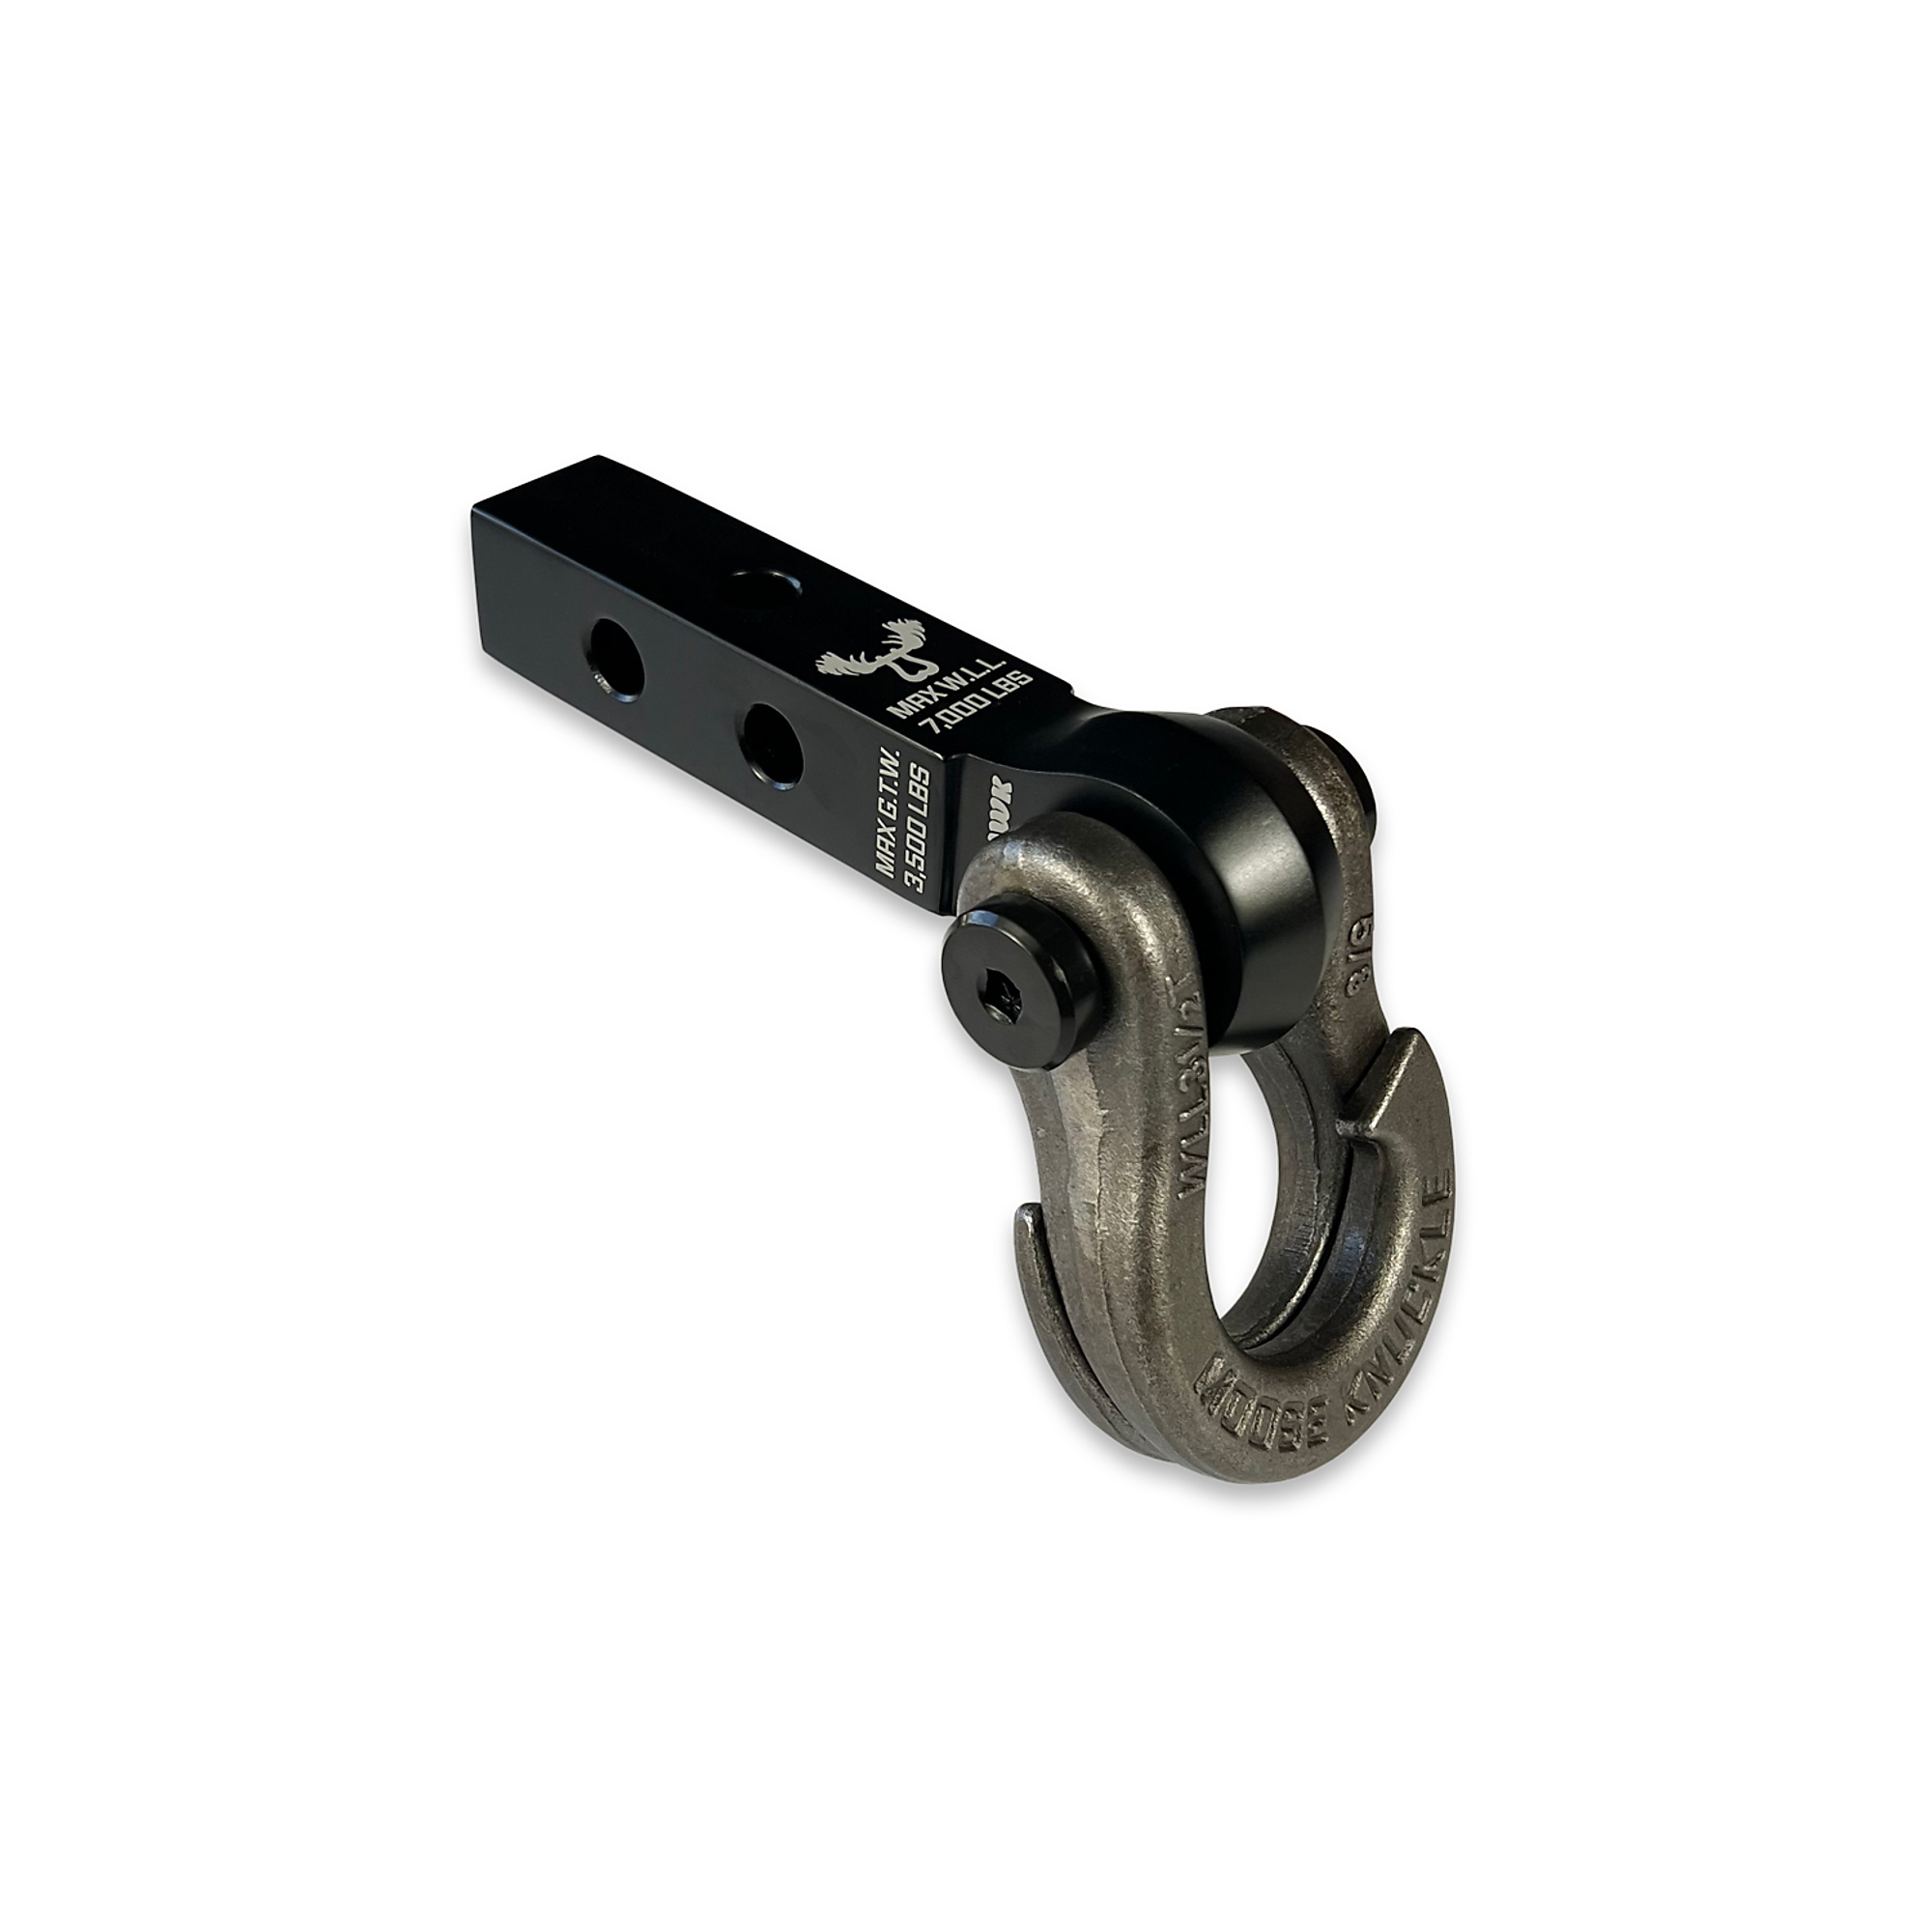 Moose Knuckle Offroad, 5/8 Jowl Split Shackle and Mohawk 1.25 Receiver Combo, Gross Towing Weight 3500 lb, Class Rating Class II, Model FN000042-014